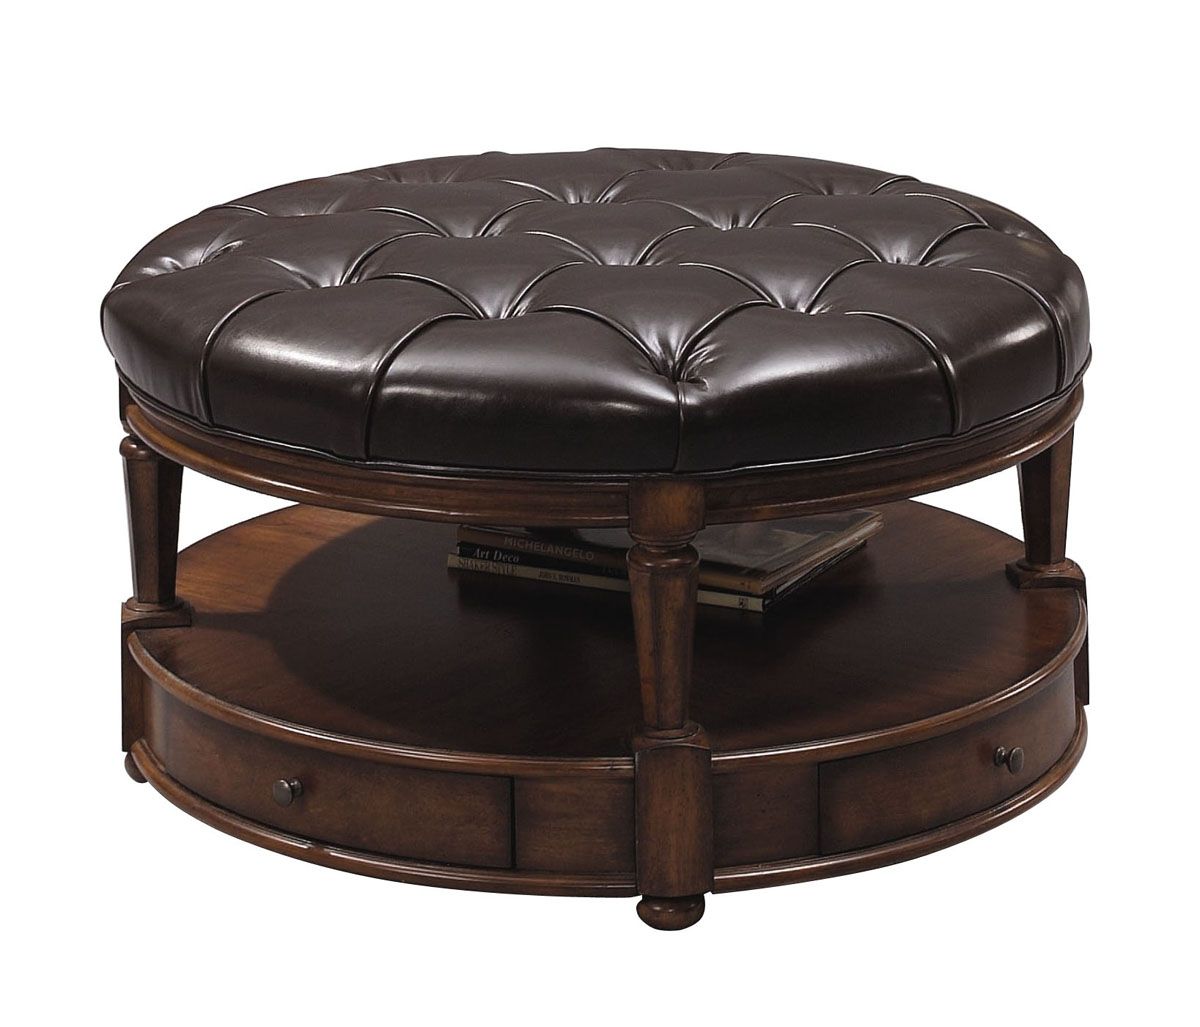 Round Tufted Ottoman Coffee Table With Storage Tufted Round Ottoman Coffee Table Free Download (View 8 of 10)